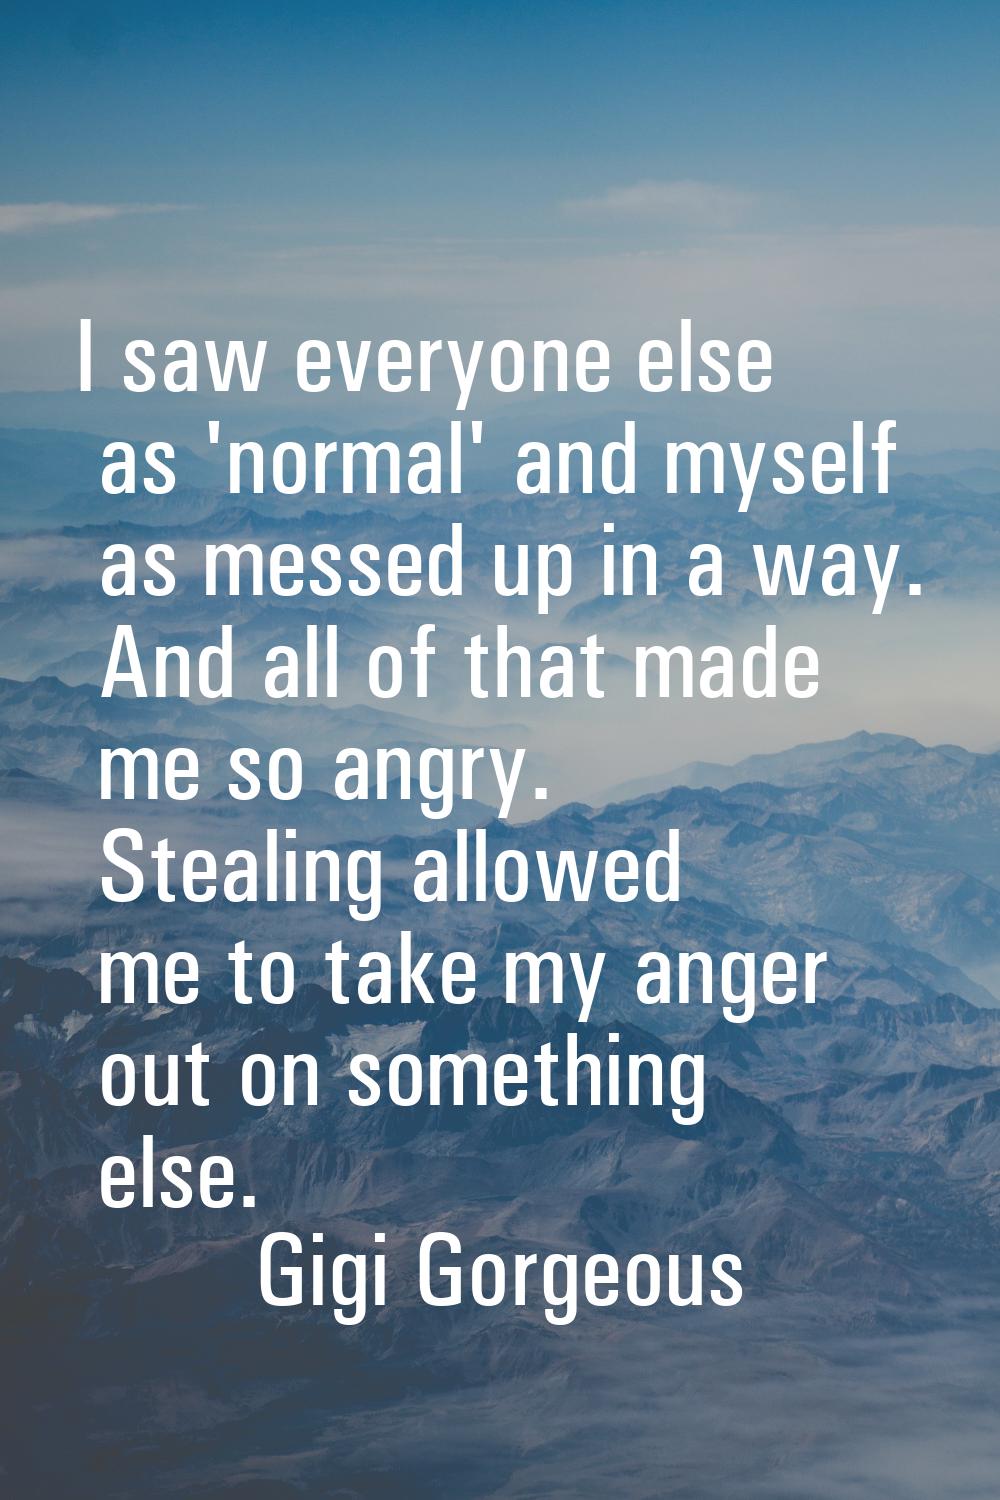 I saw everyone else as 'normal' and myself as messed up in a way. And all of that made me so angry.